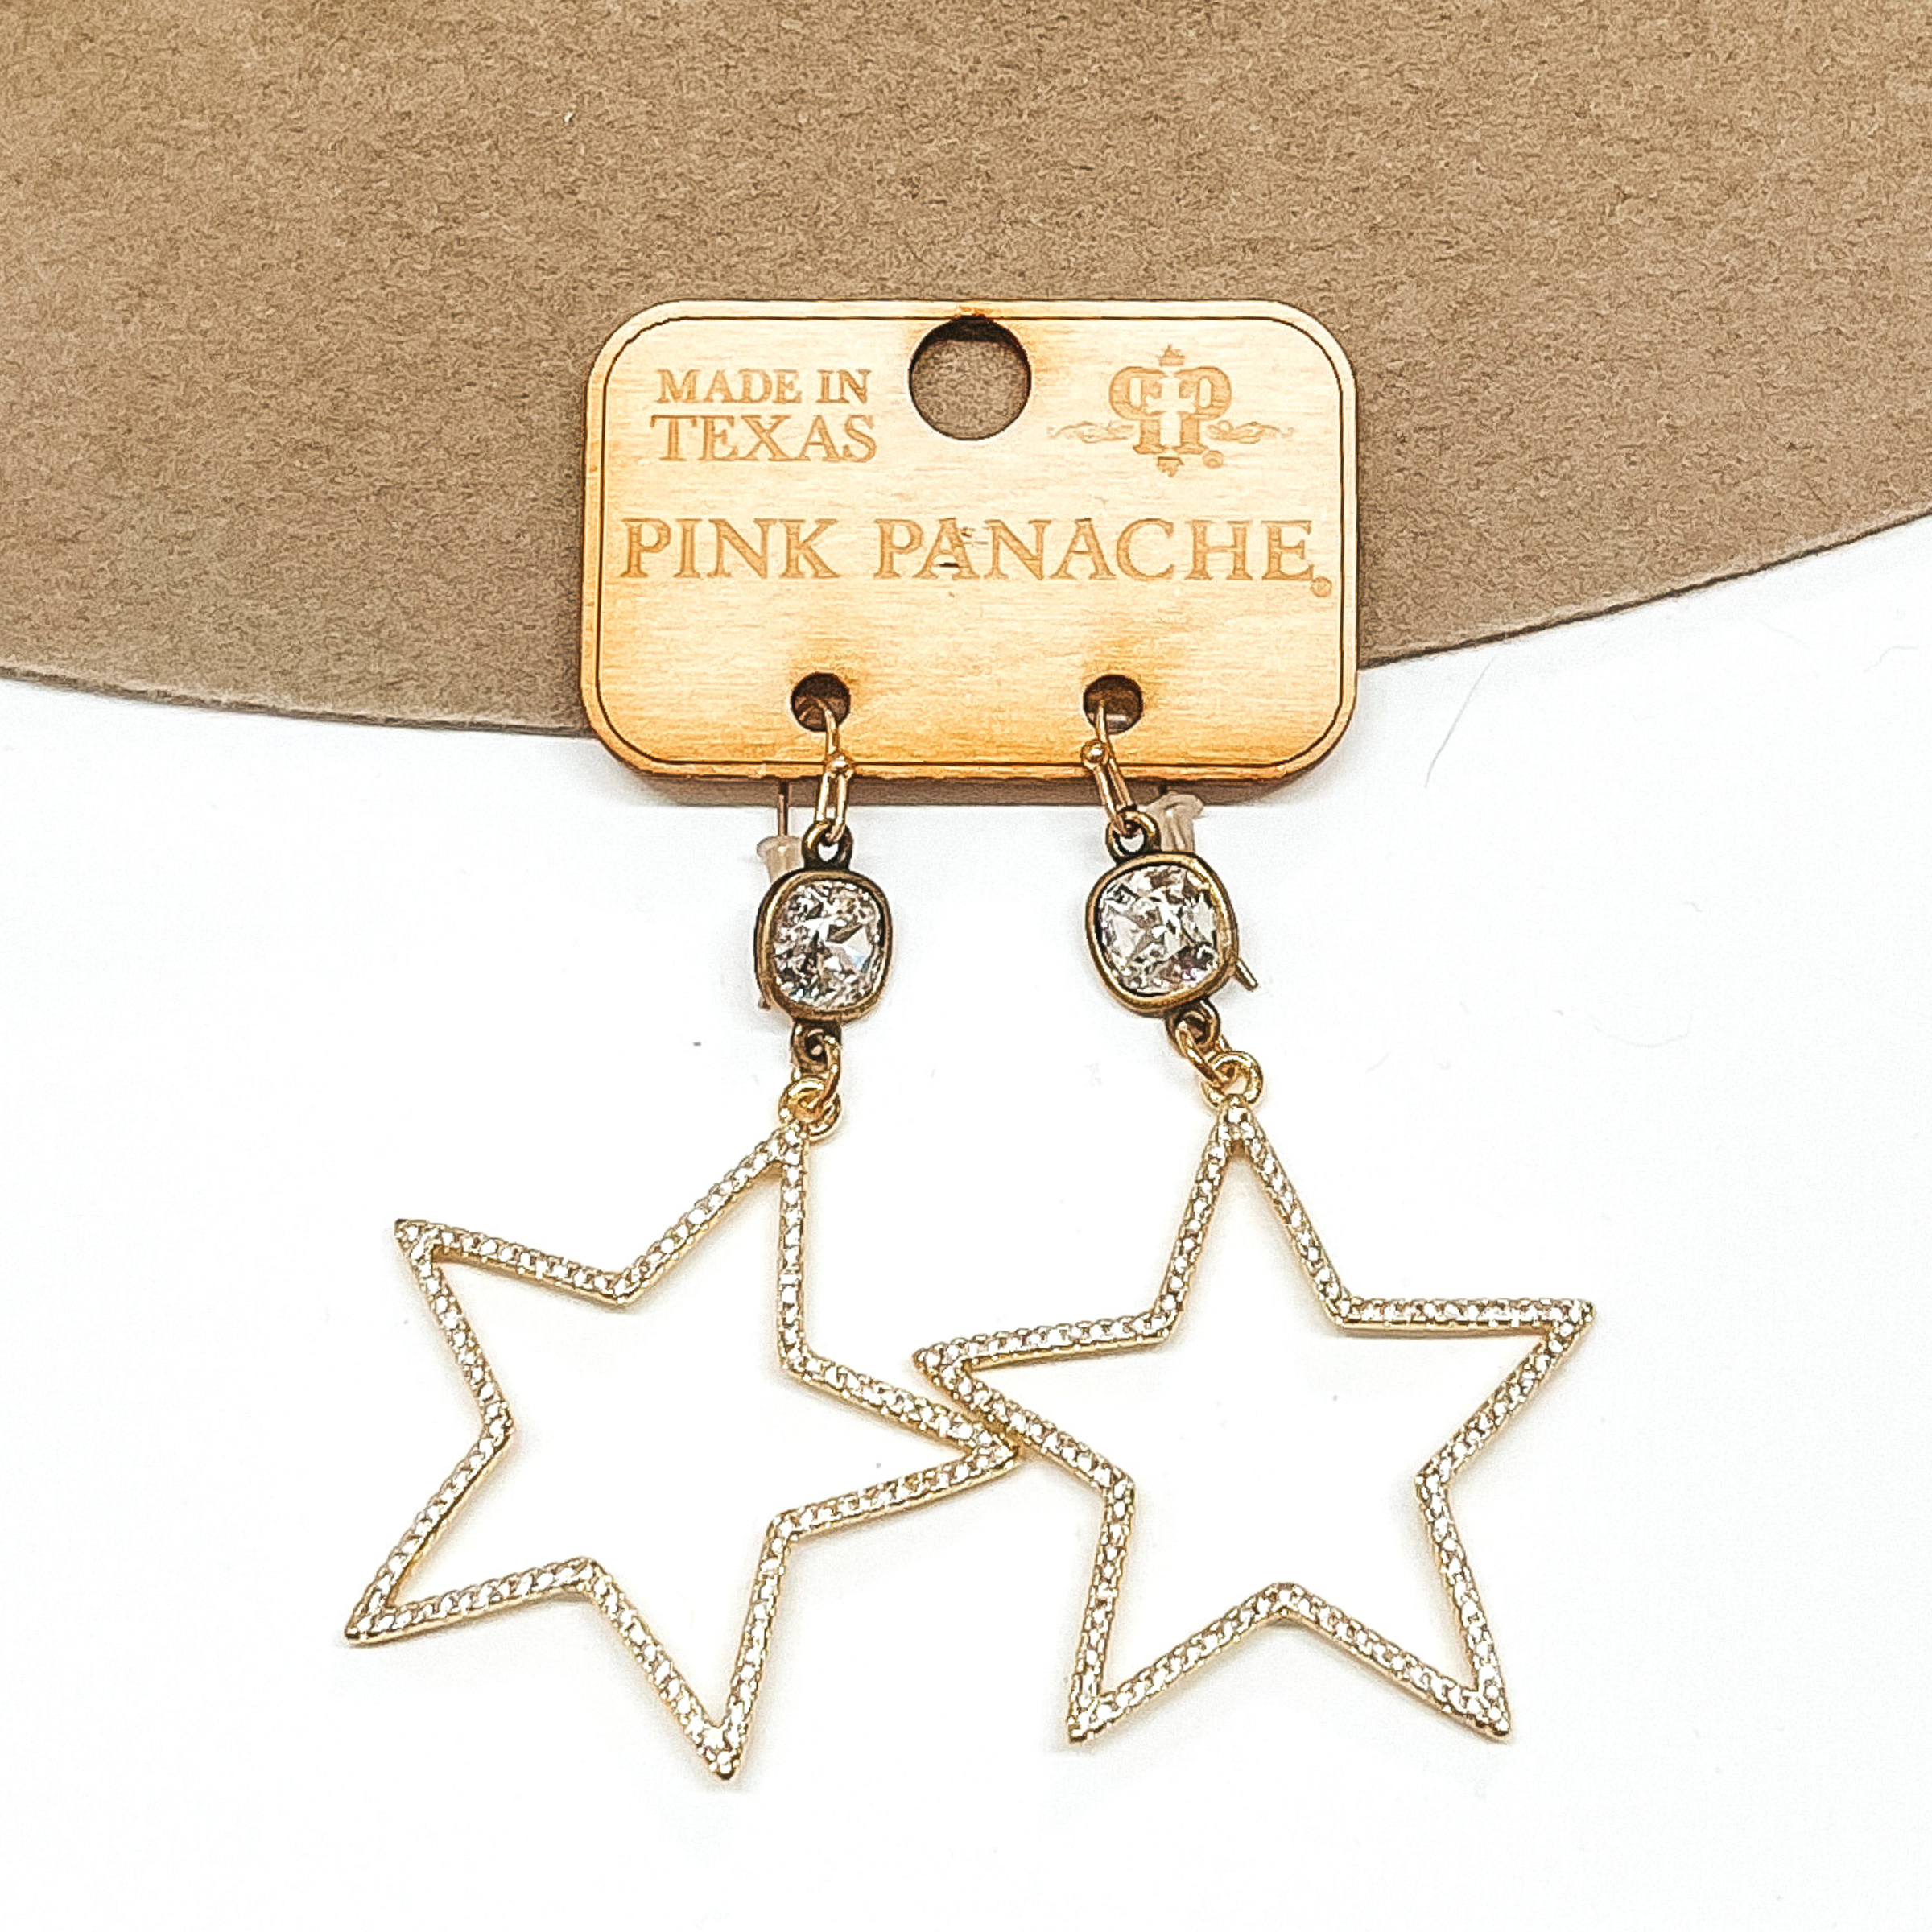 Clear cushion cut crystals that are in a bronze settings and are connected to bronze fish hook earrings. Hanging from the crystals are gold open star pendants. These earrings are pictured on a tan and white background. 